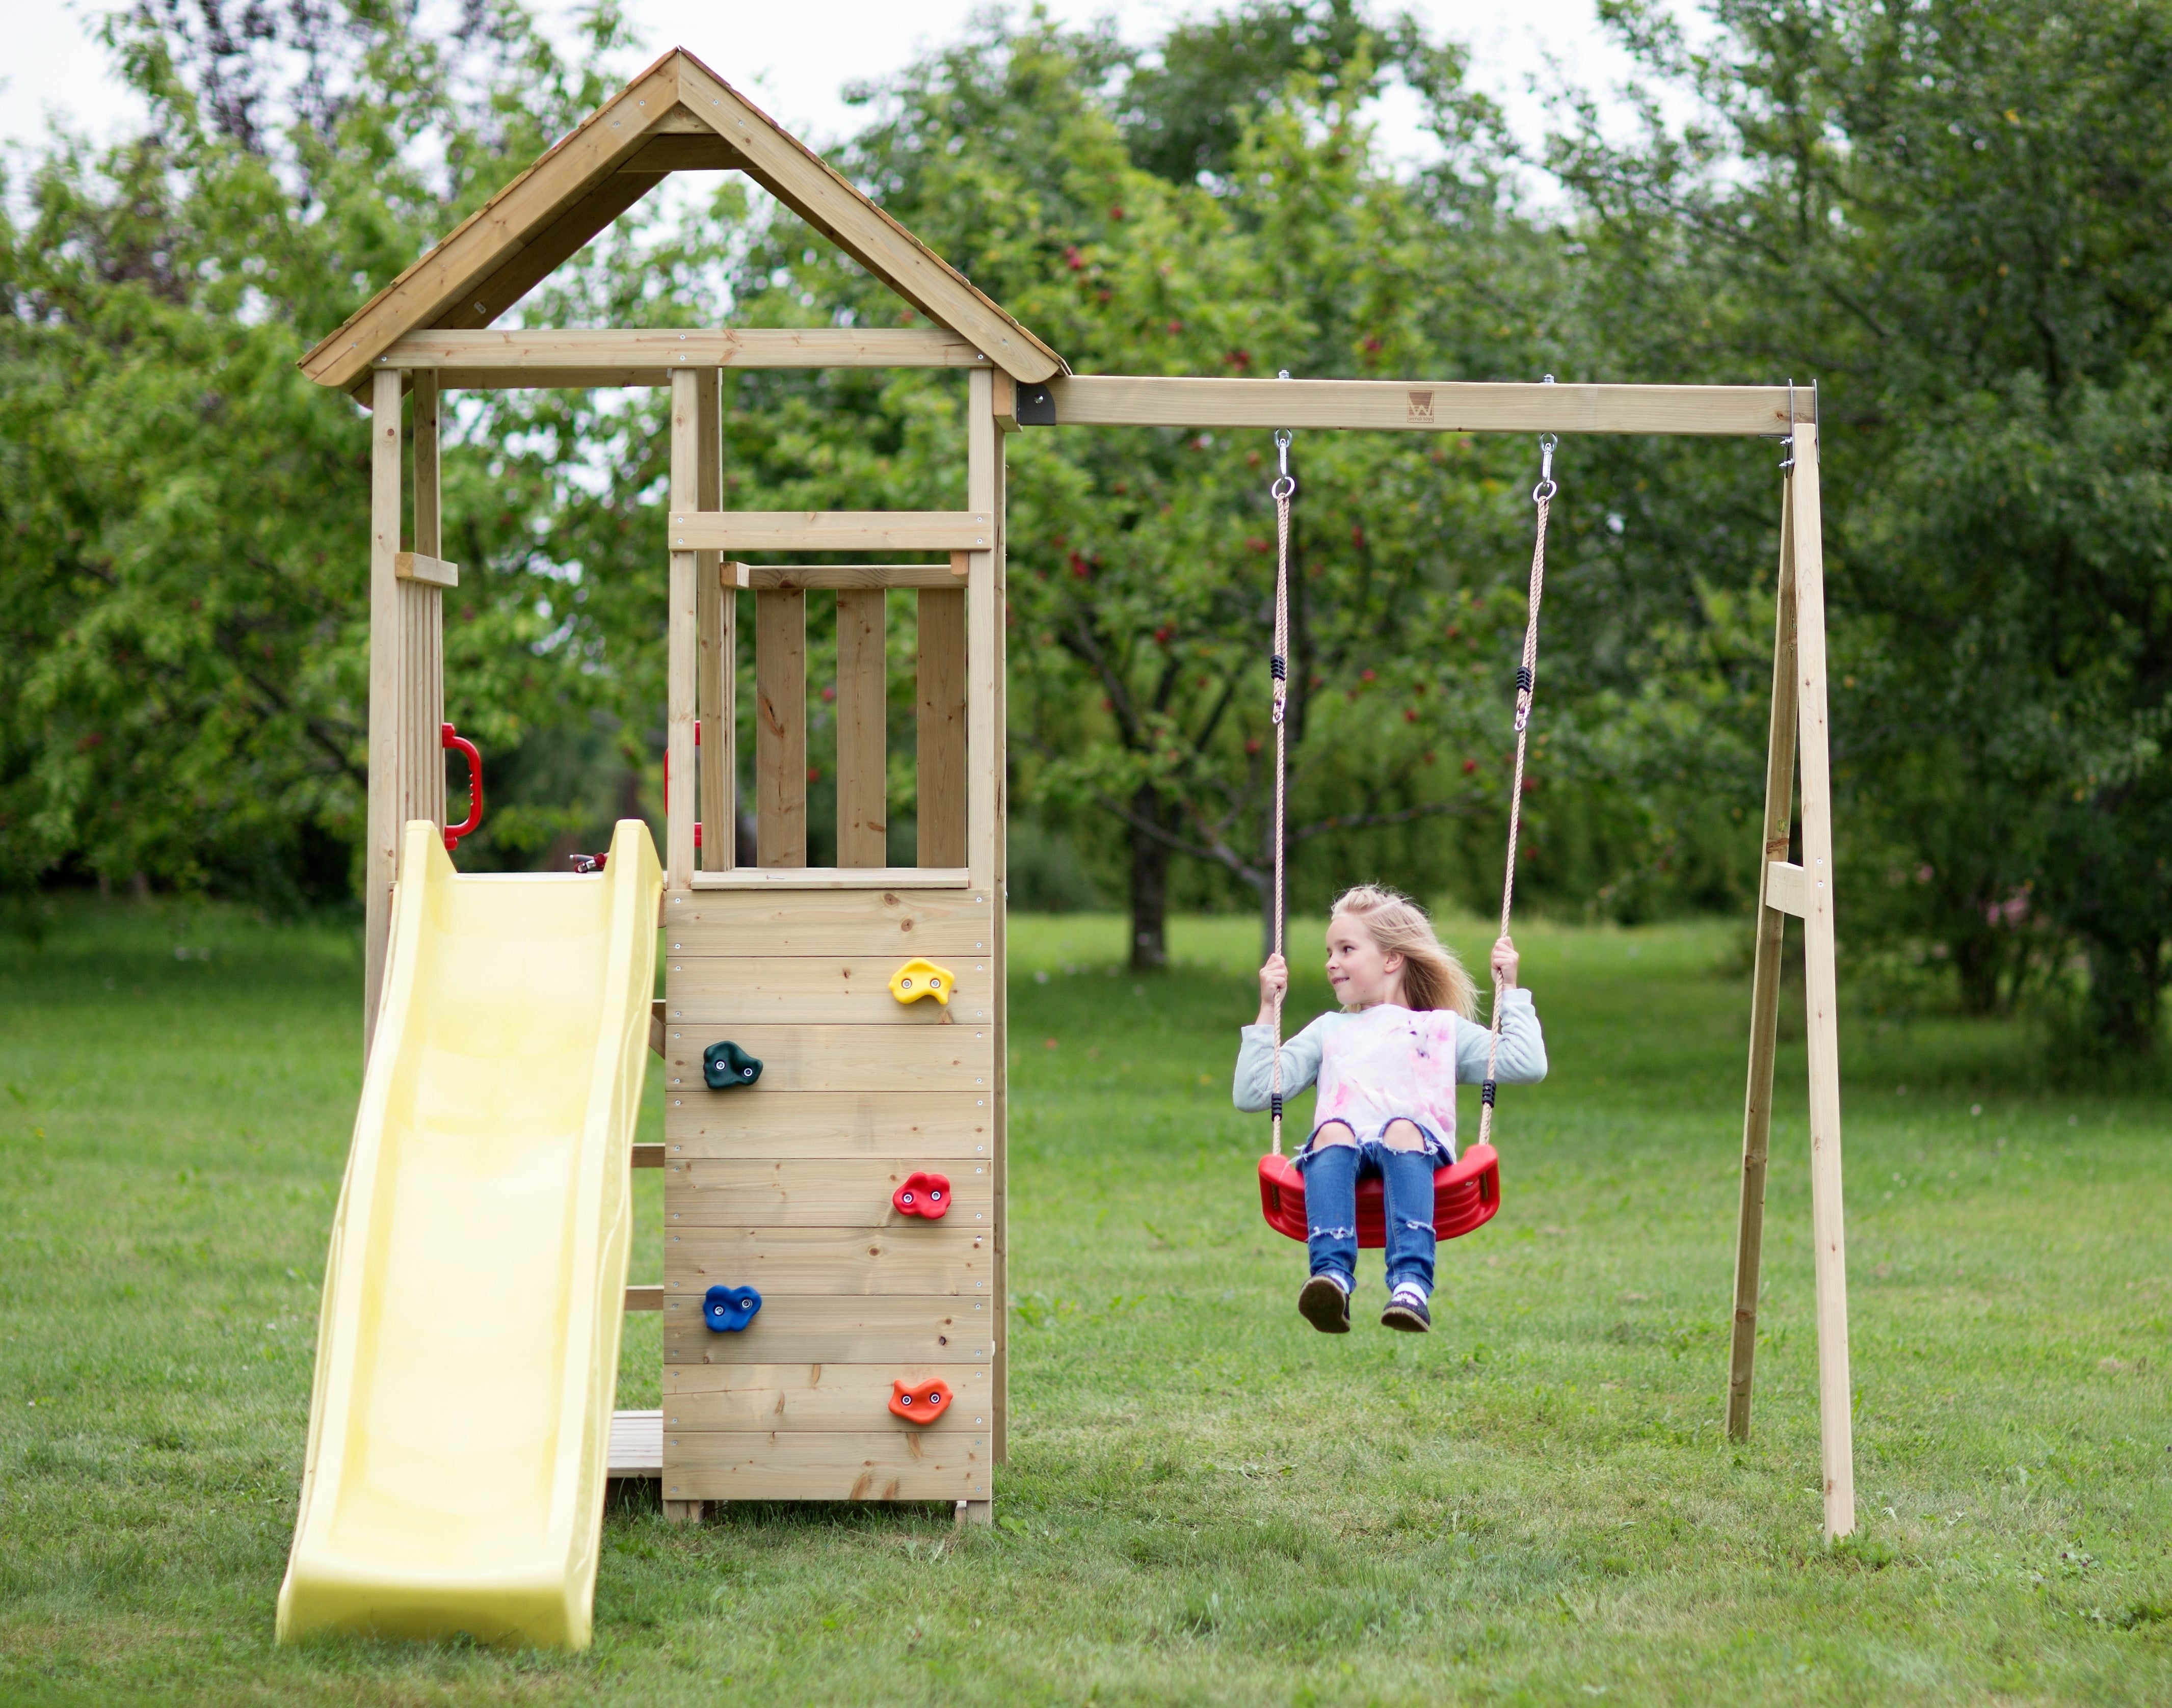 J7 Junior Play Tower with Slide, Sandpit, Picnick Bench and Single Swing